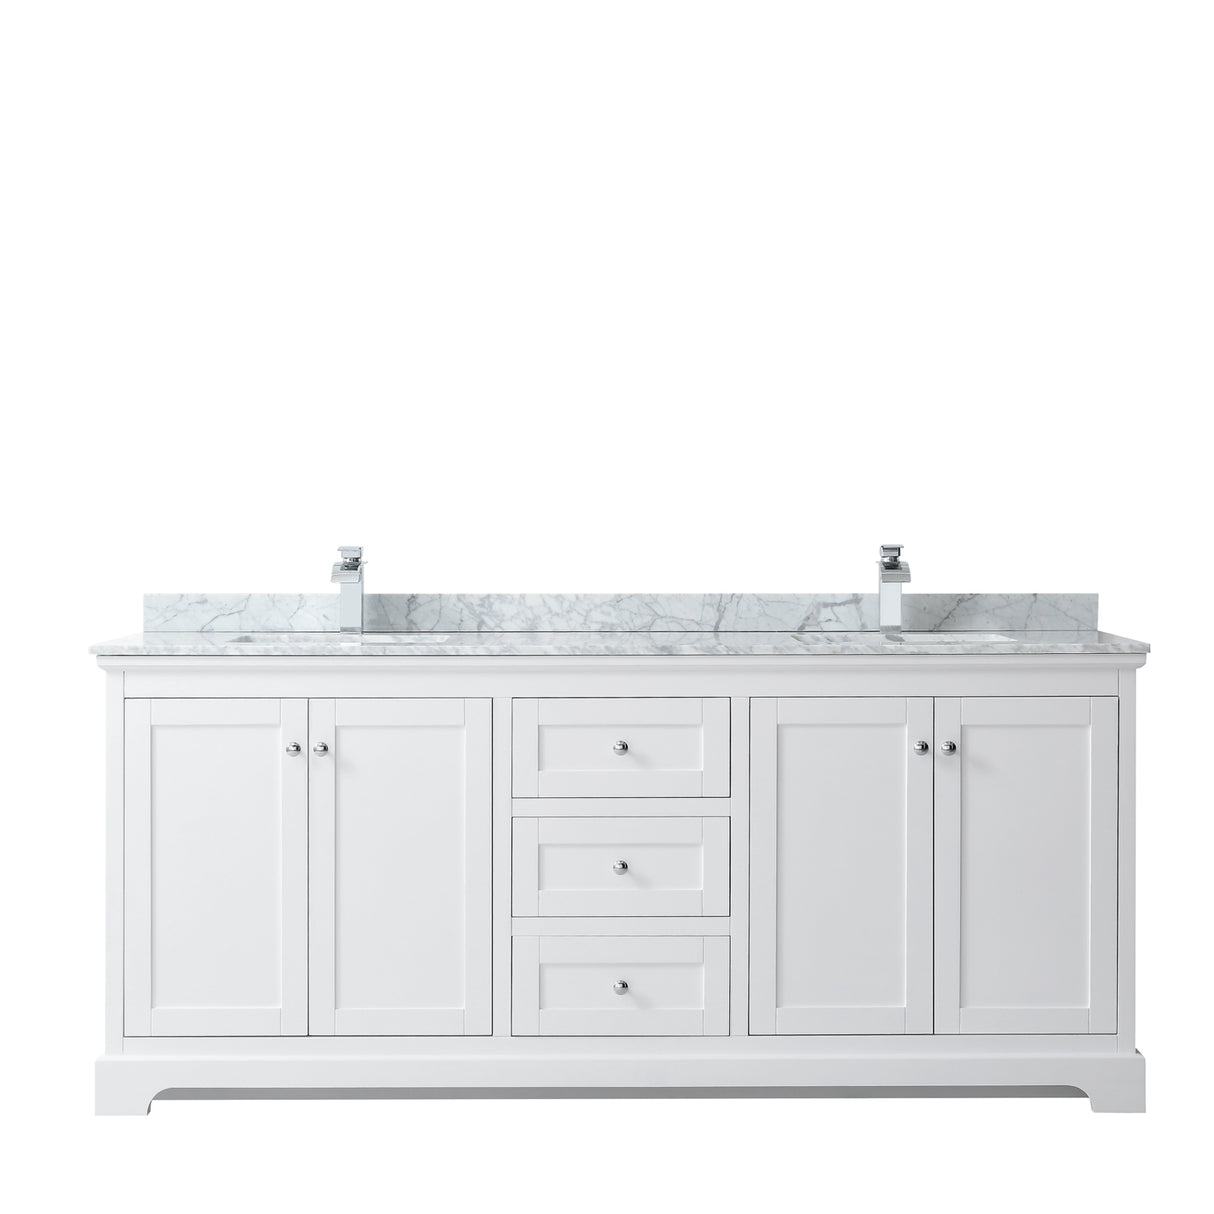 Avery 80 Inch Double Bathroom Vanity in White White Carrara Marble Countertop Undermount Square Sinks and No Mirror